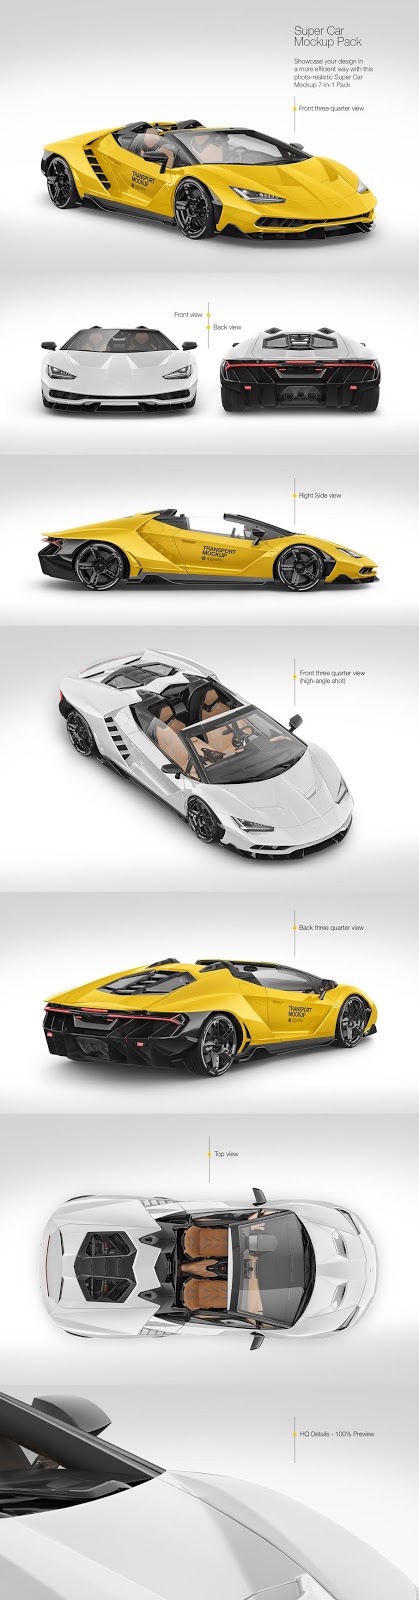 Download Lamborghini Mockup Free Best Premium Mockups Create Your Diy Projects Using Your Cricut Explore Silhouette And More The Free Cut Files Include Psd Svg Dxf Eps And Png Files